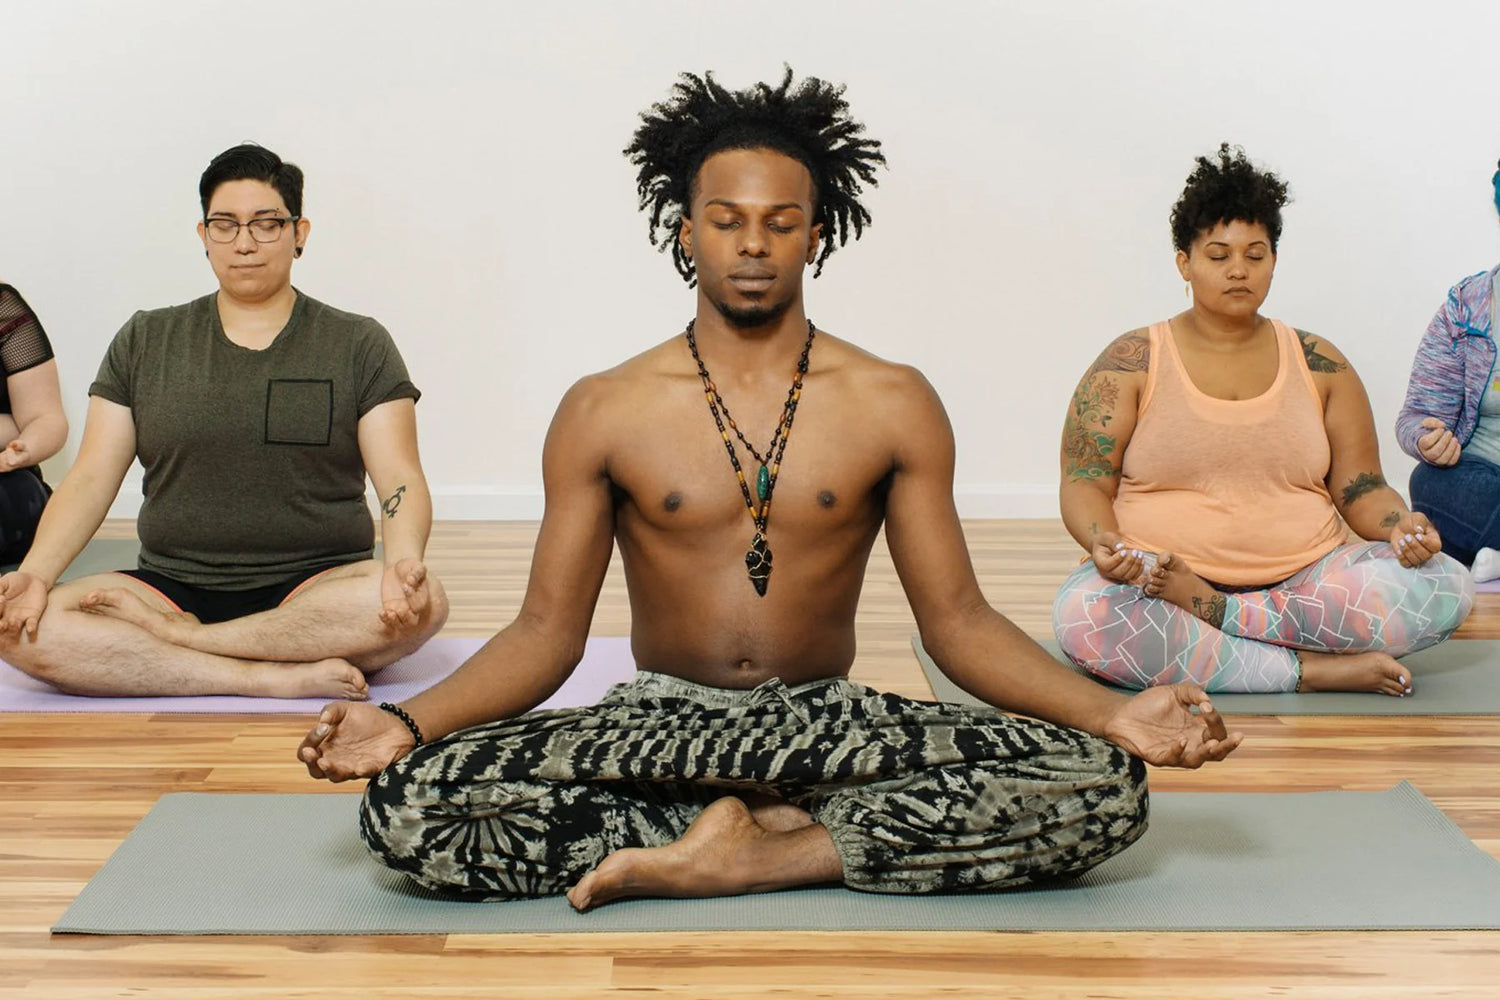 Group of people practicing meditation together